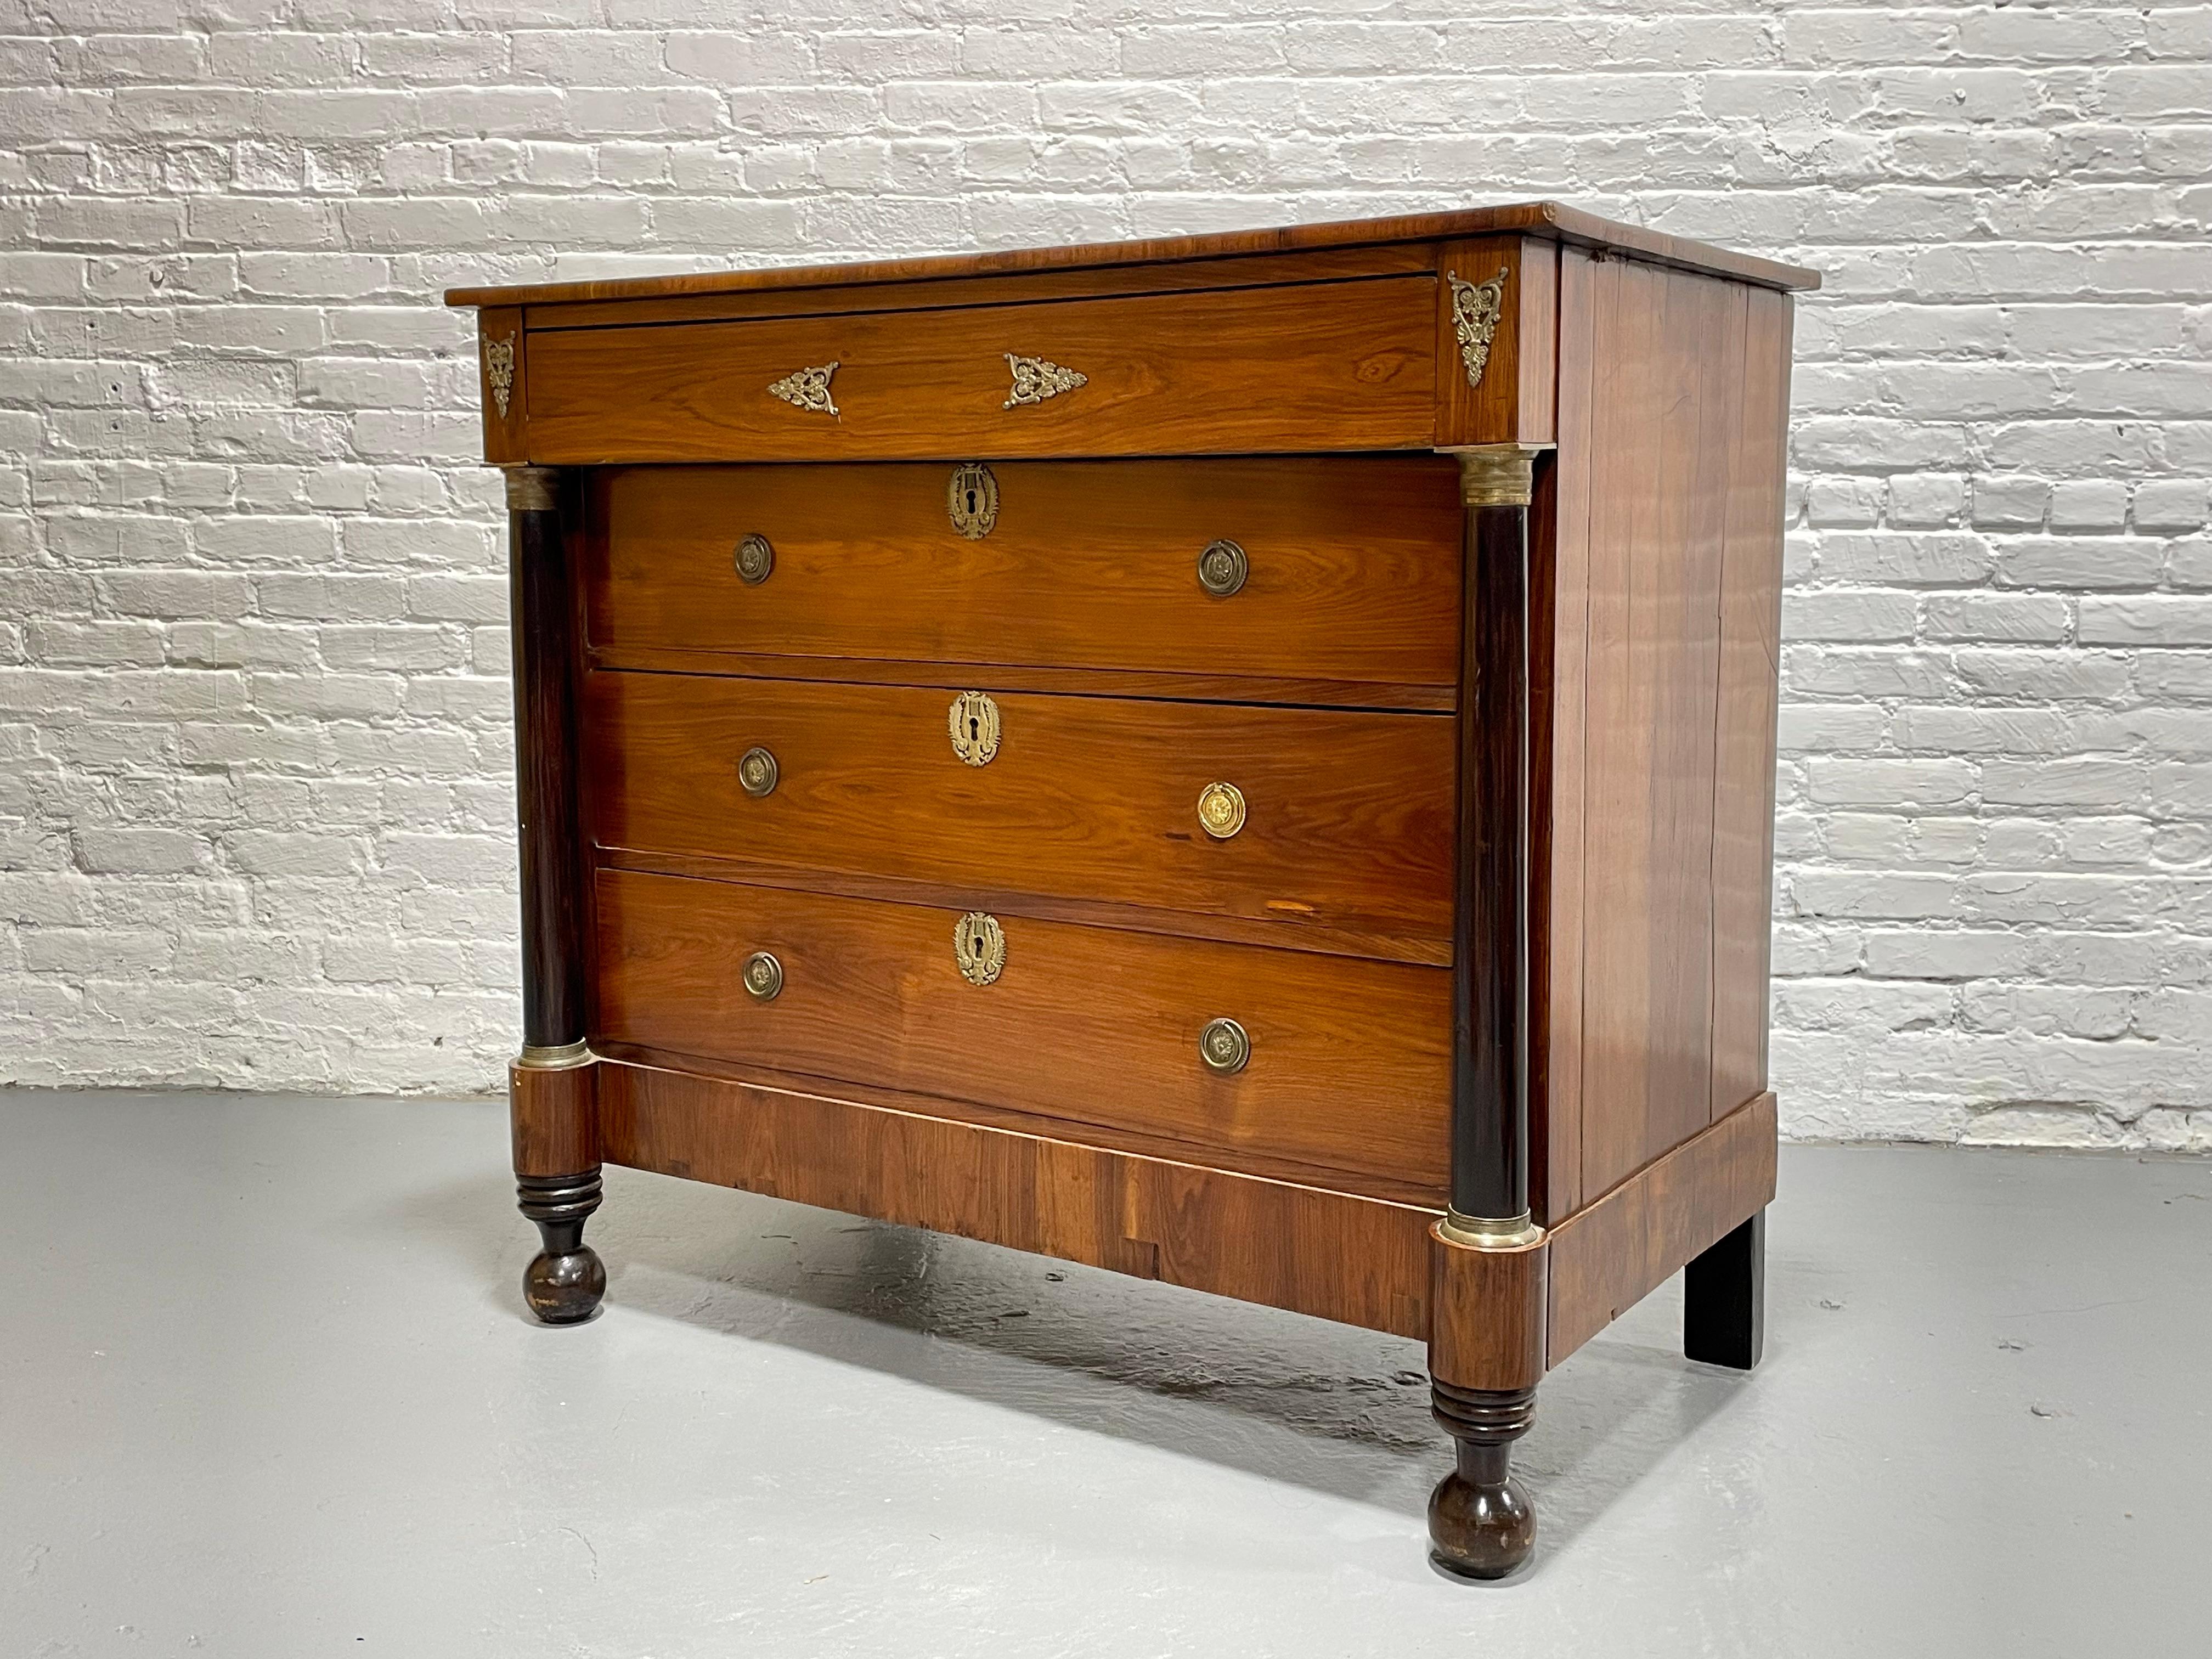 Ebonized French First Empire Period Chest of Drawers / Commode / Dresser, c. 1810 For Sale